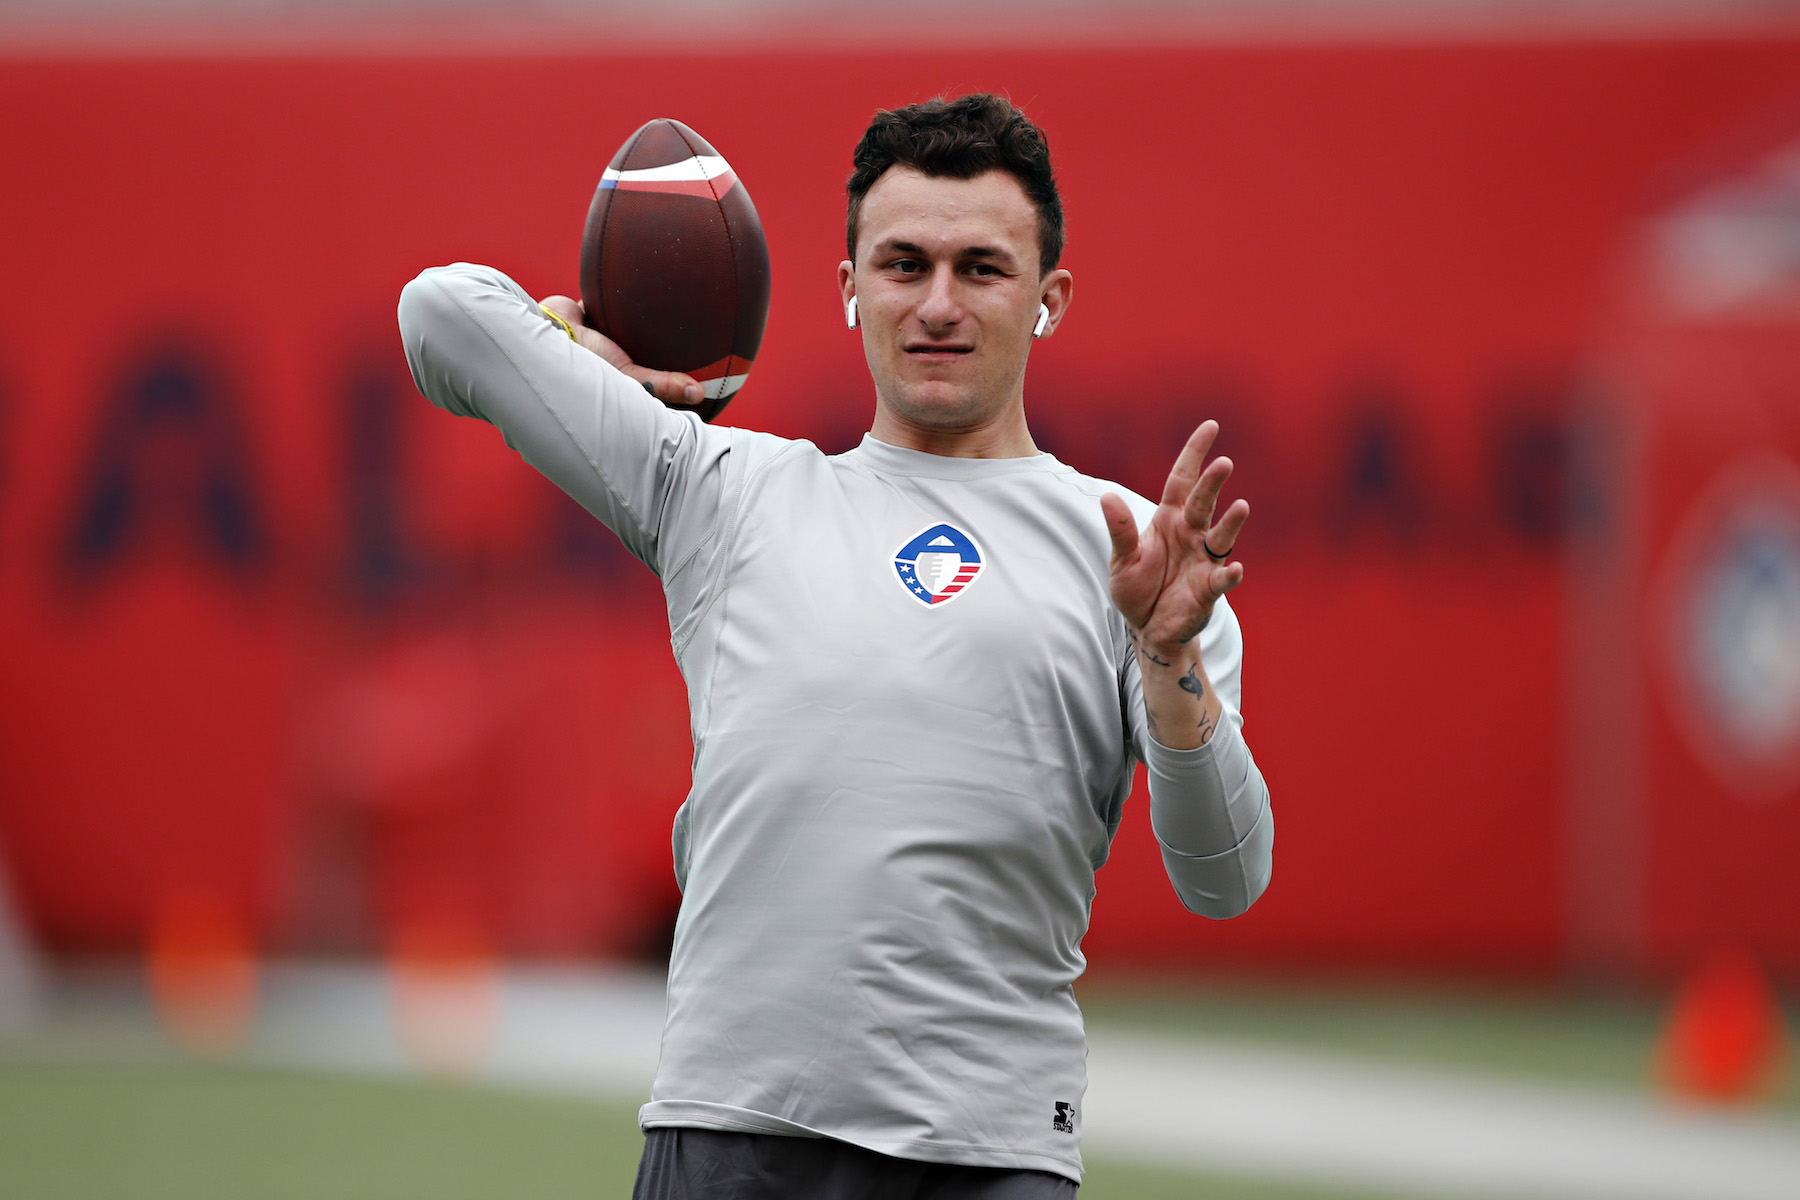 While Johnny Manziel was once on top of the football world, the quarterback is ready to move on from the sport.